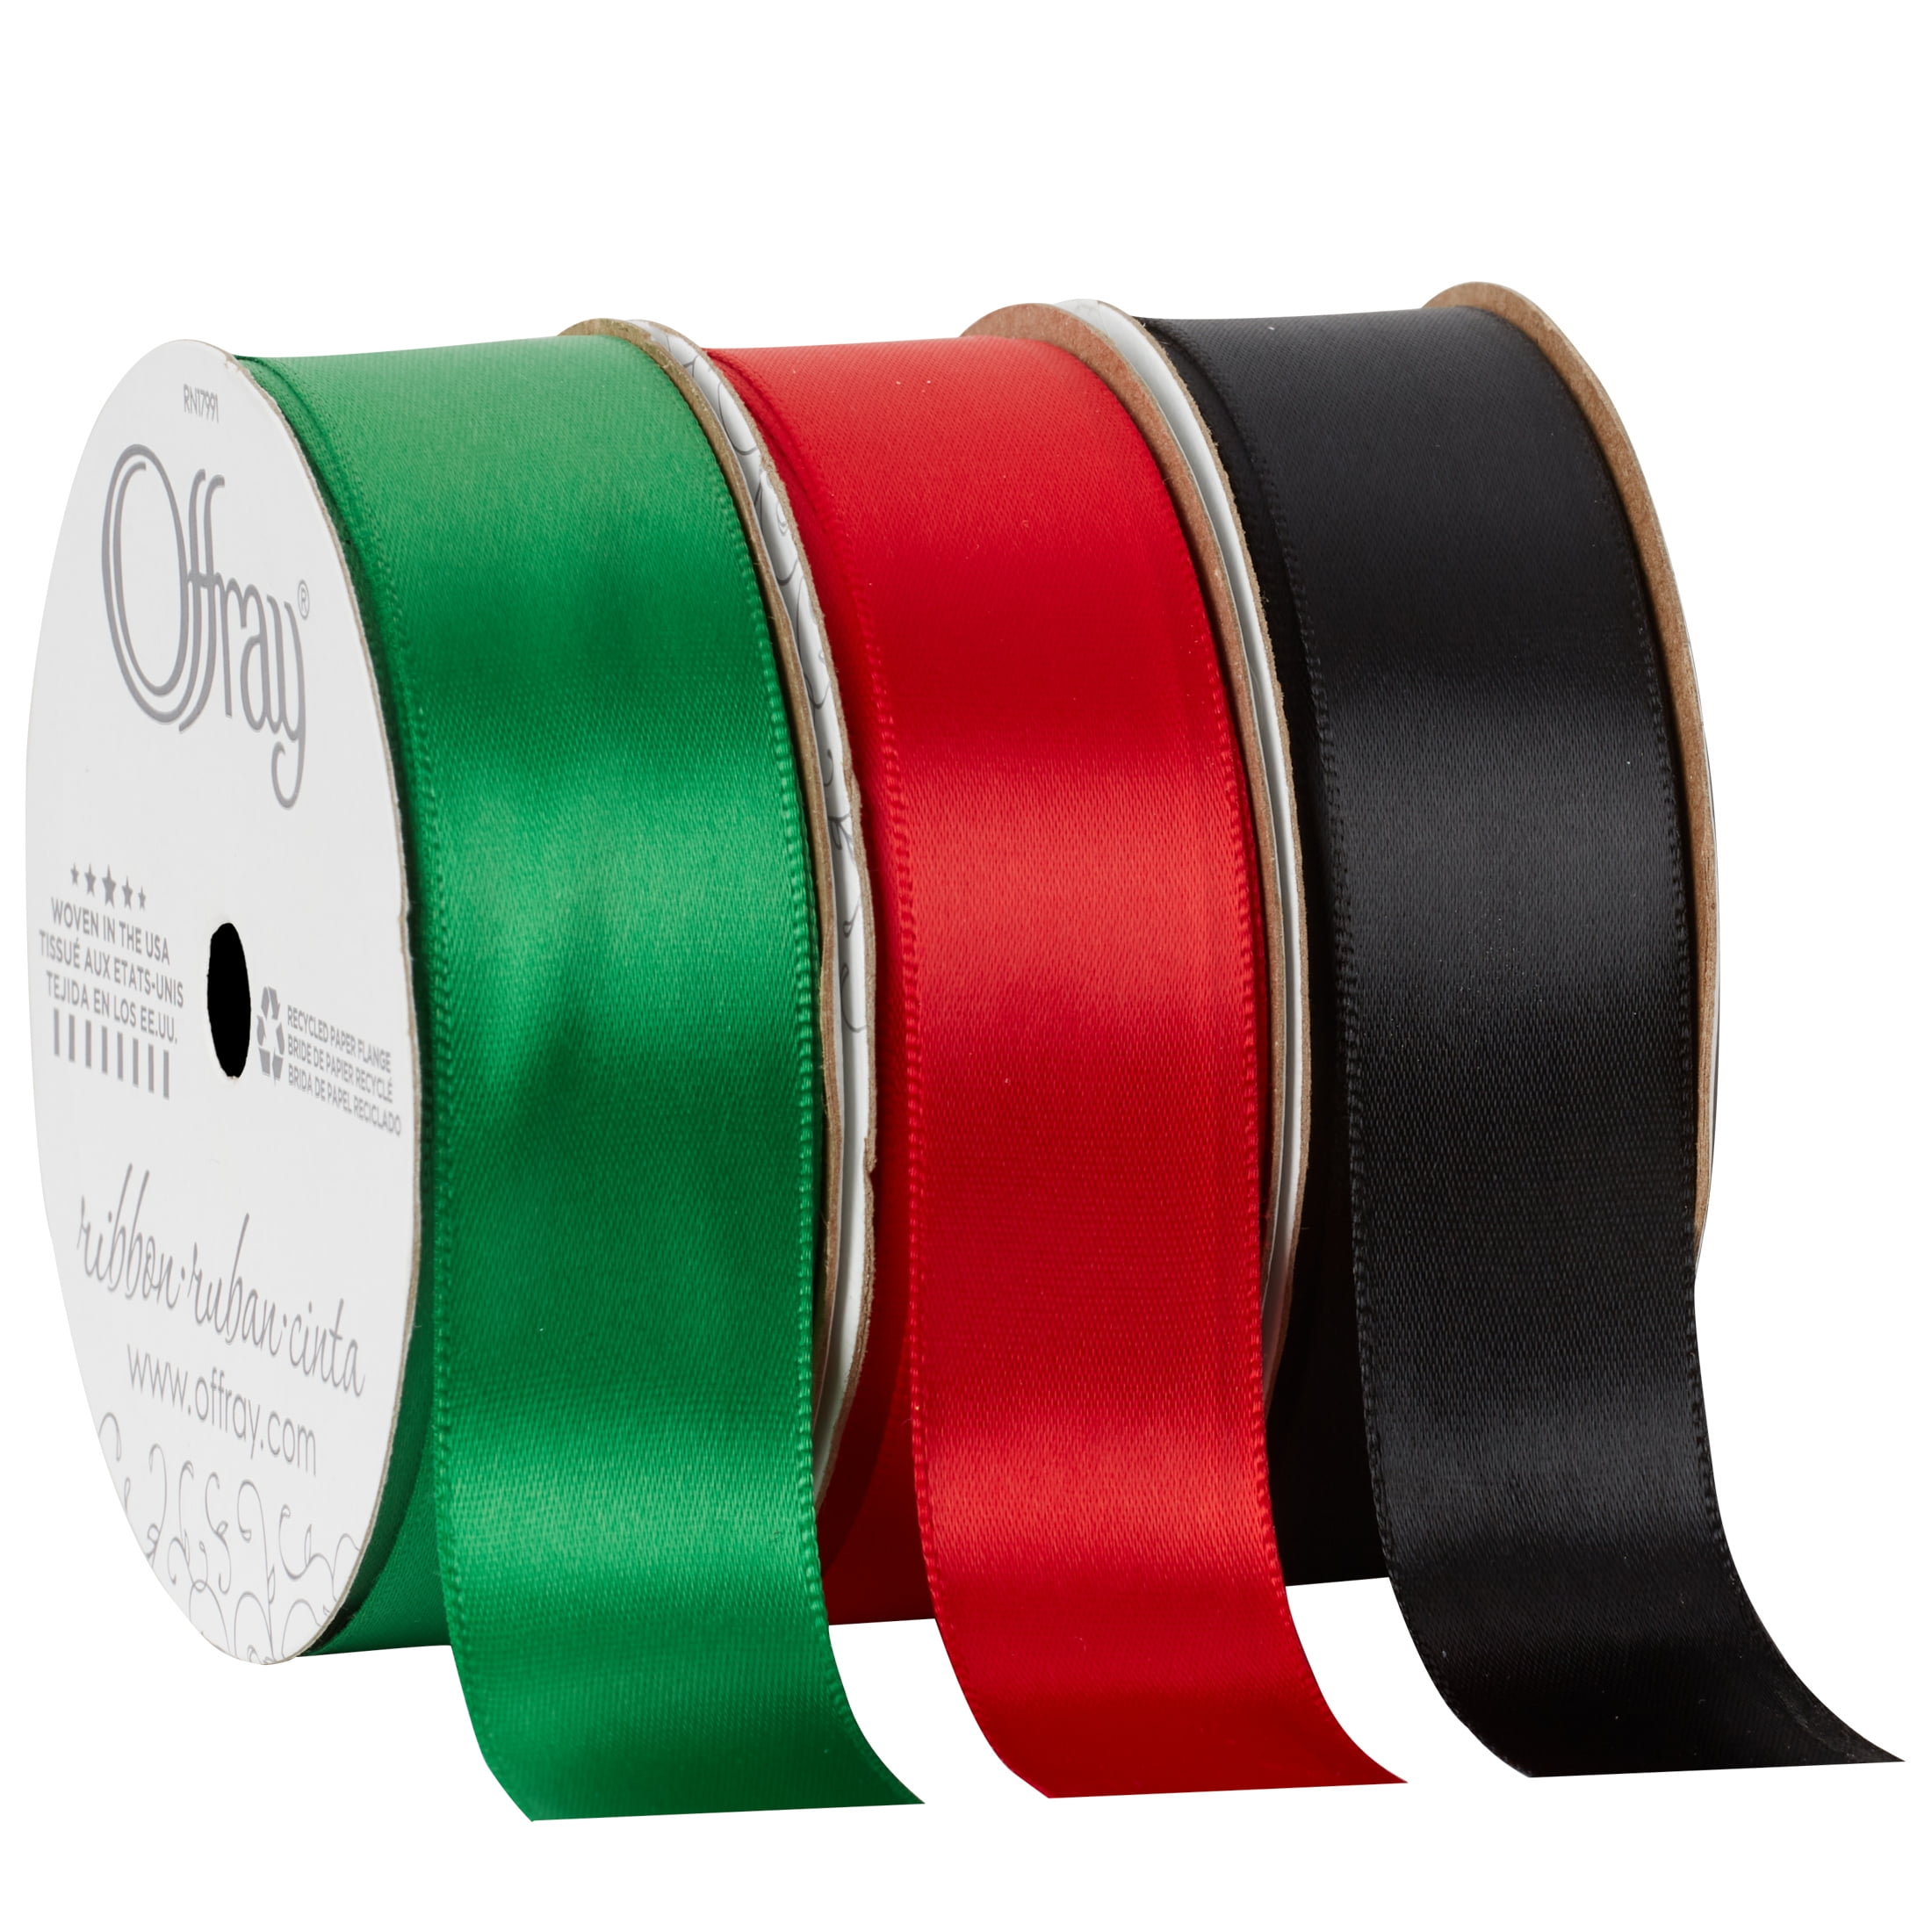 Offray Microcheck Craft Ribbon, 1/4-Inch x 12-Feet, Red